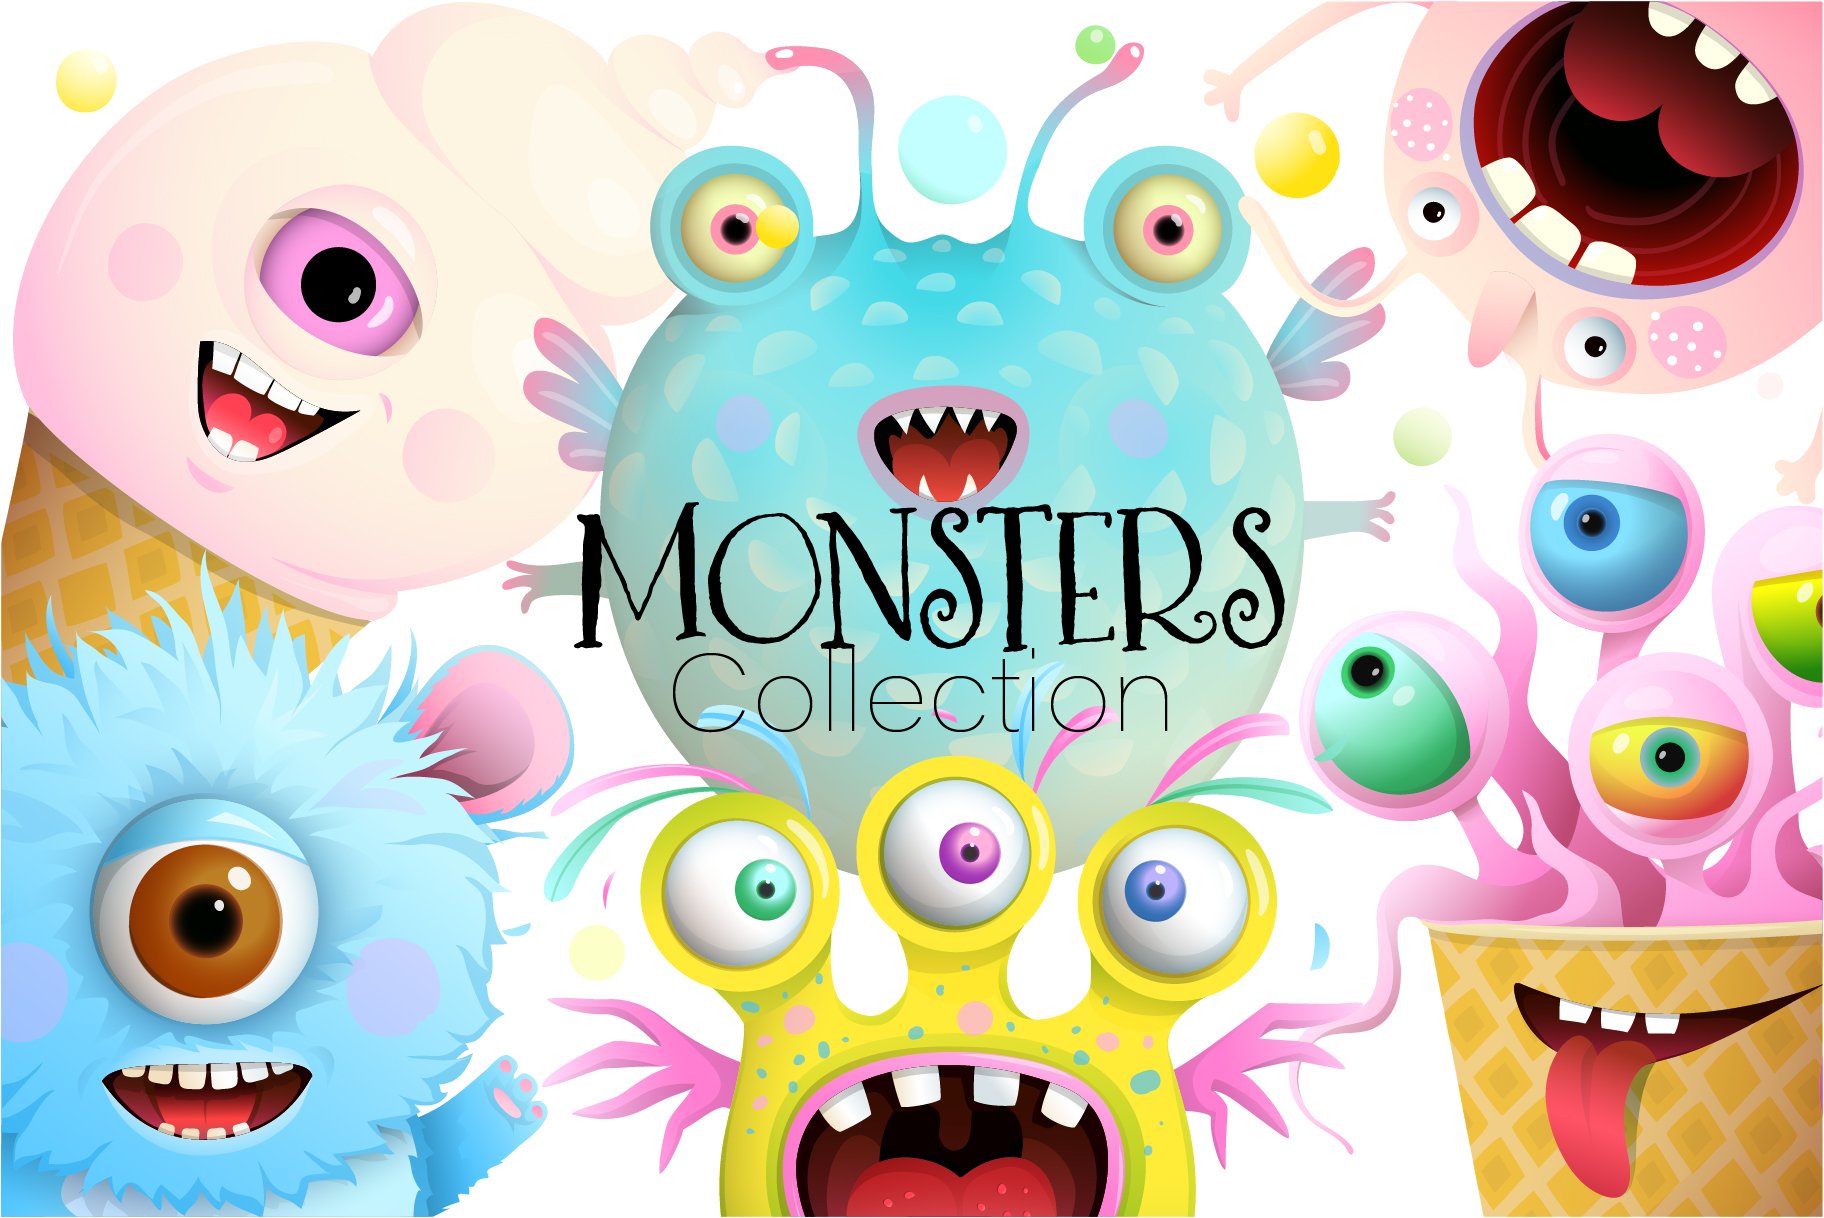 Monsters Eyes and Mouth for Kids Set cover image.